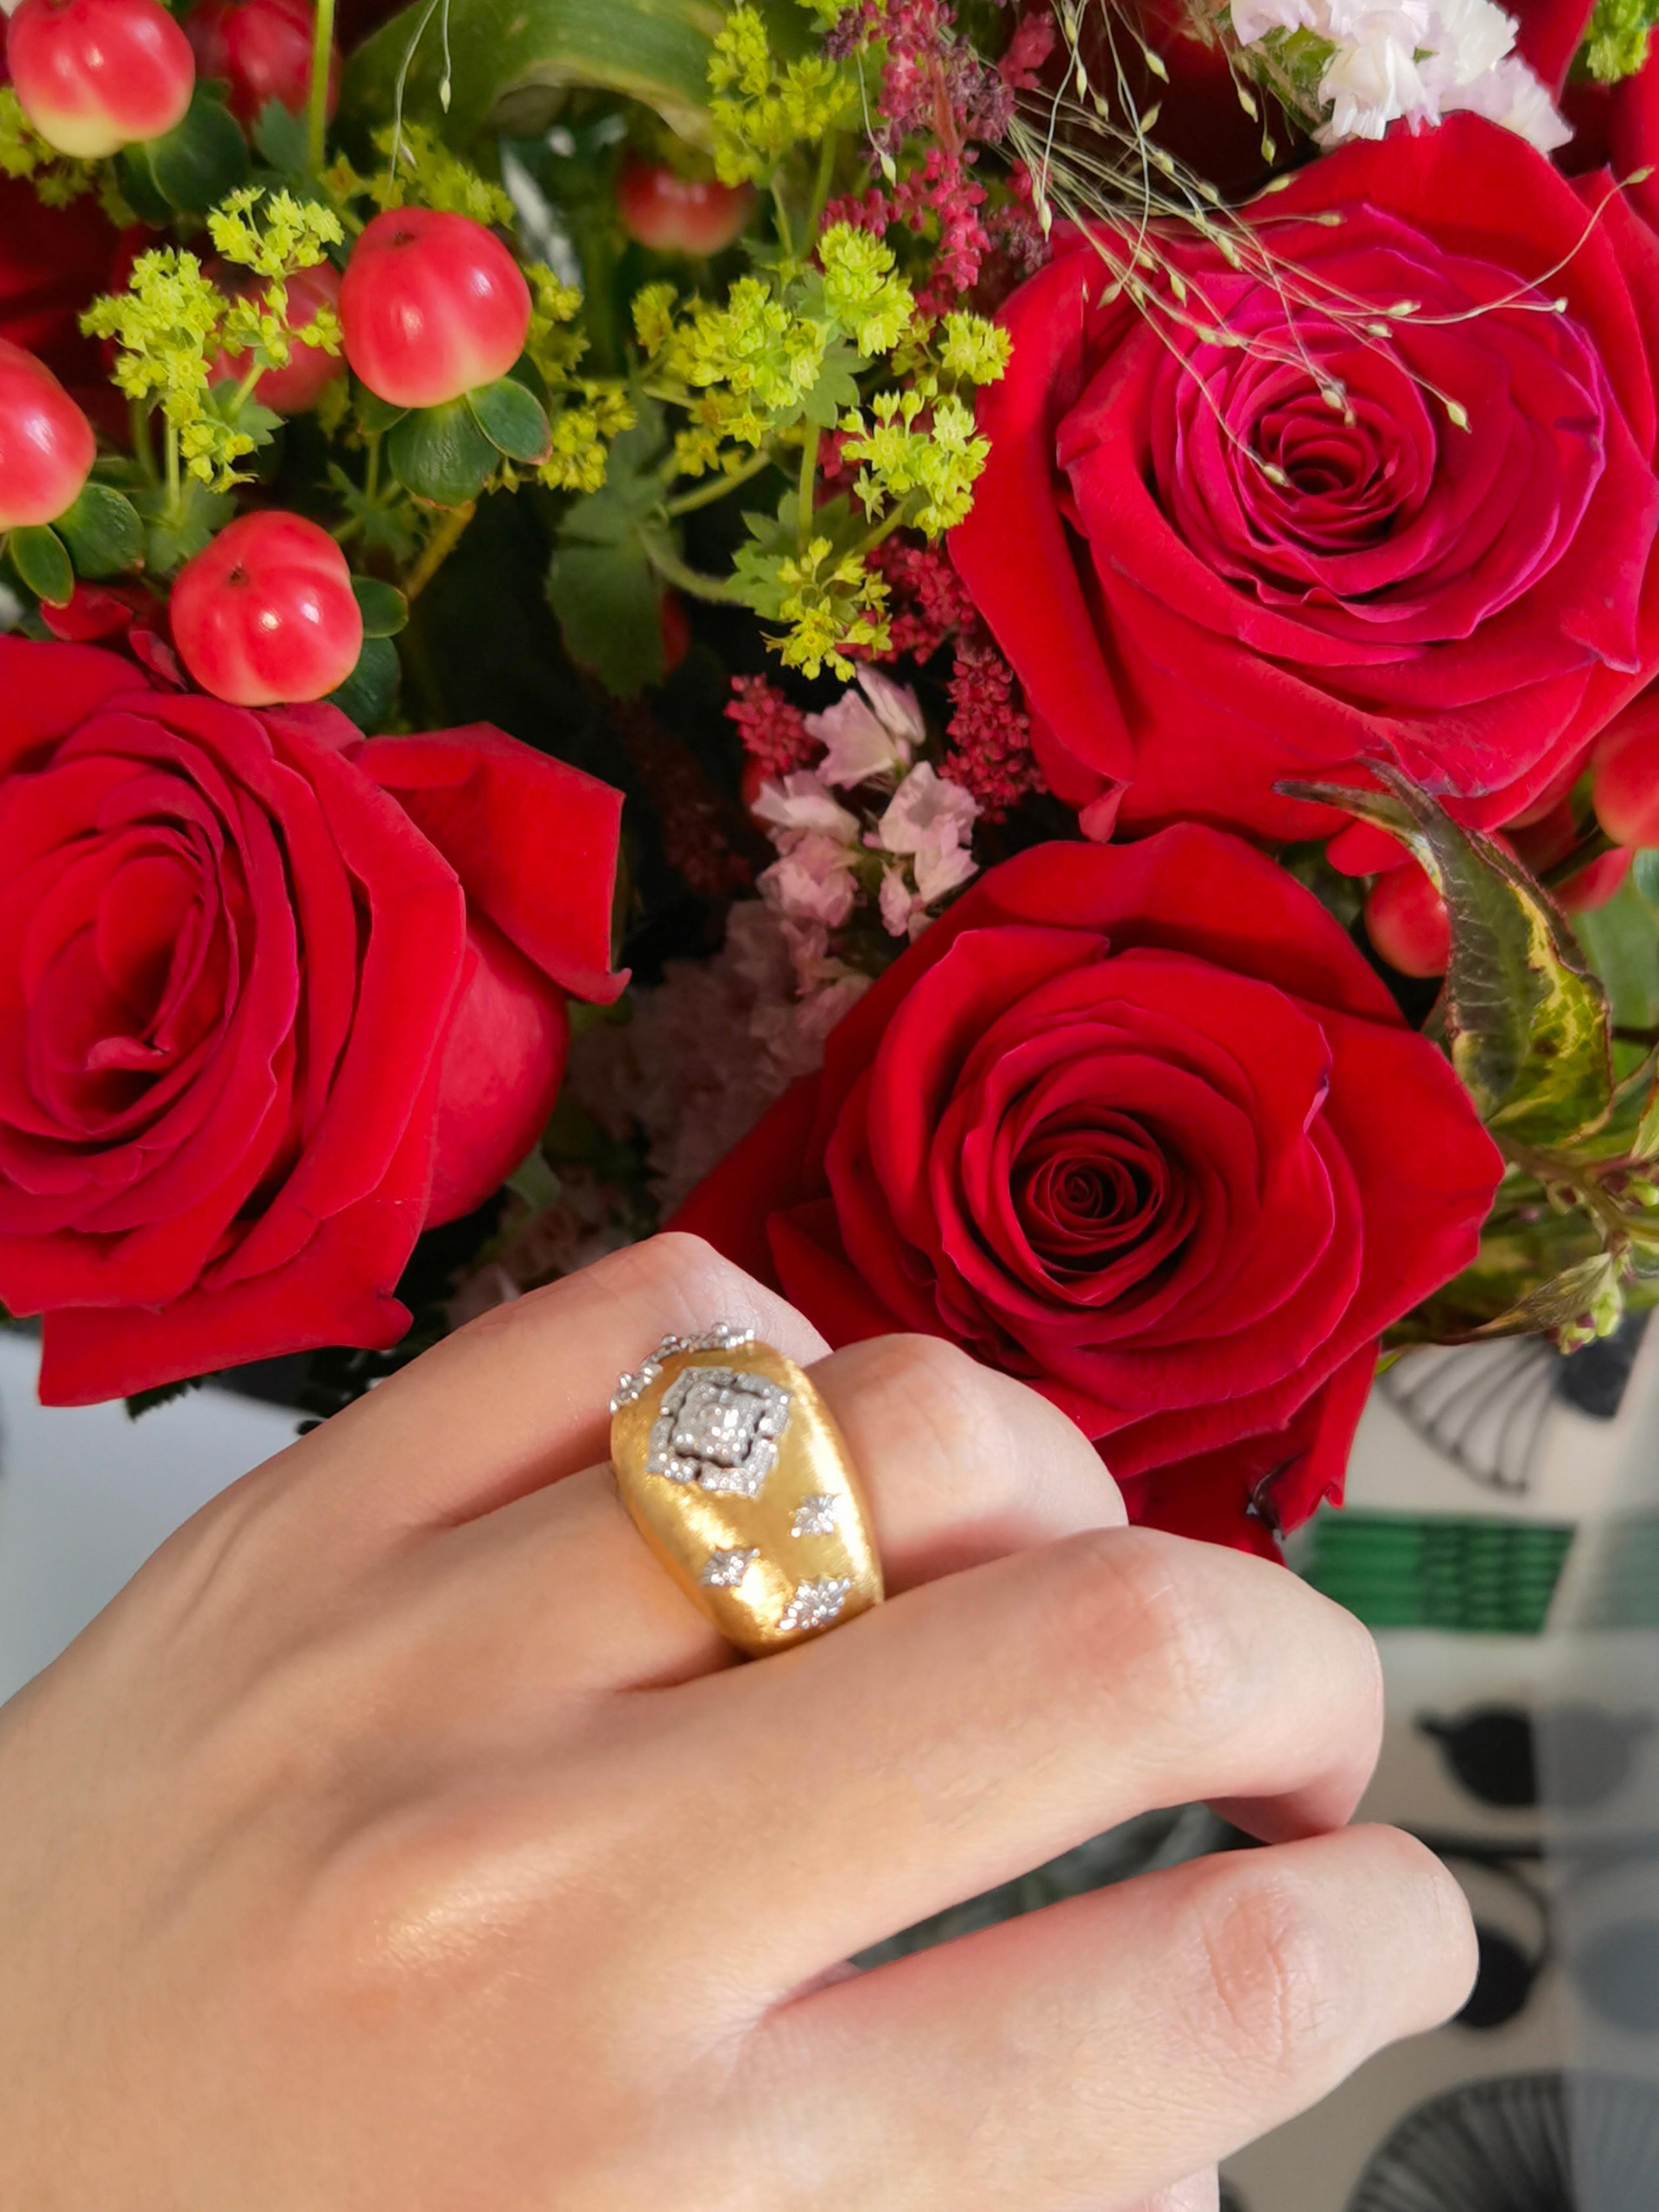 18K Yellow & White Gold Diamond Openwork Dome Ring in Florentine Finish
US Size: 6.5

33 Diamonds - 0.14 CT
18K White Gold and Yellow Gold - 11.98 GM

The family-owned company, Althoff Jewelry, has one mission – create elegant, luxurious and